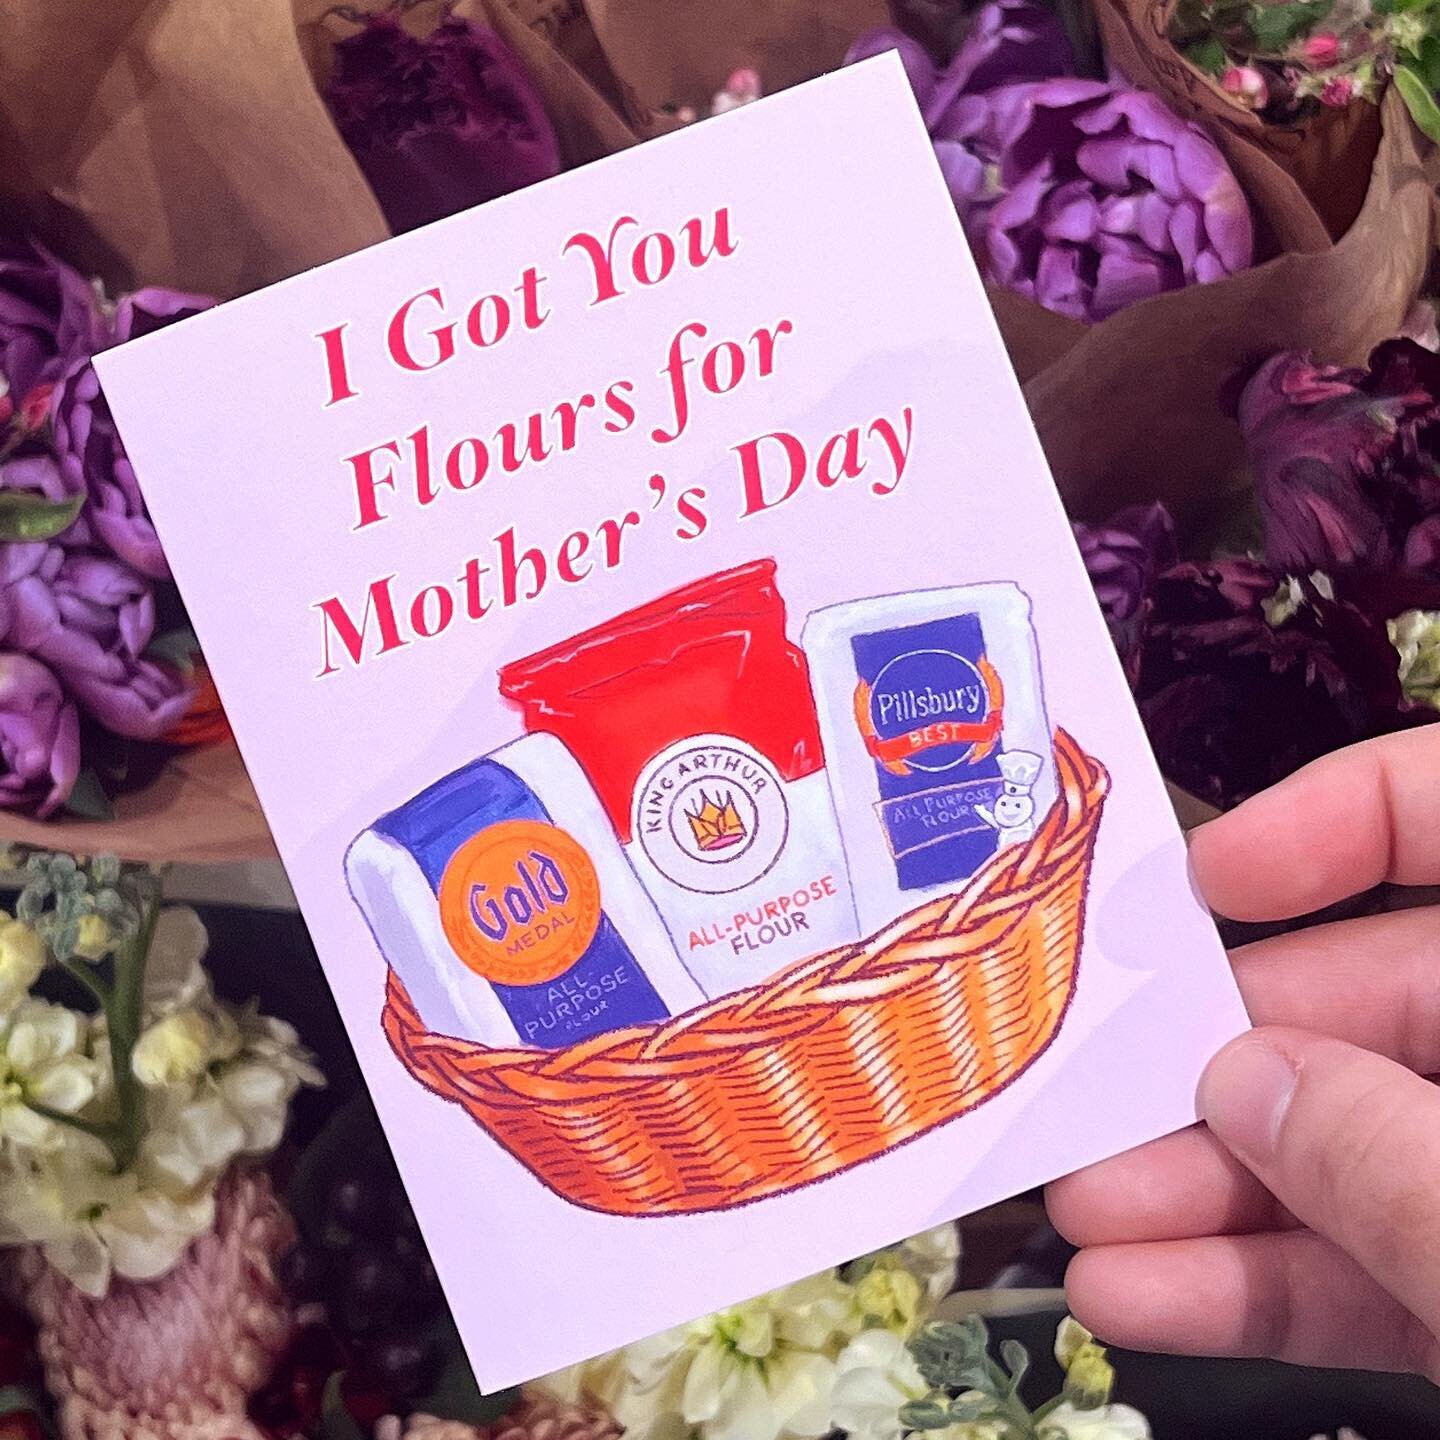 Don&rsquo;t forget to get your mom or mother figure a card for Mother&rsquo;s Day! I&rsquo;ve got super cute cards at @bostonpublicmarket waiting for you!